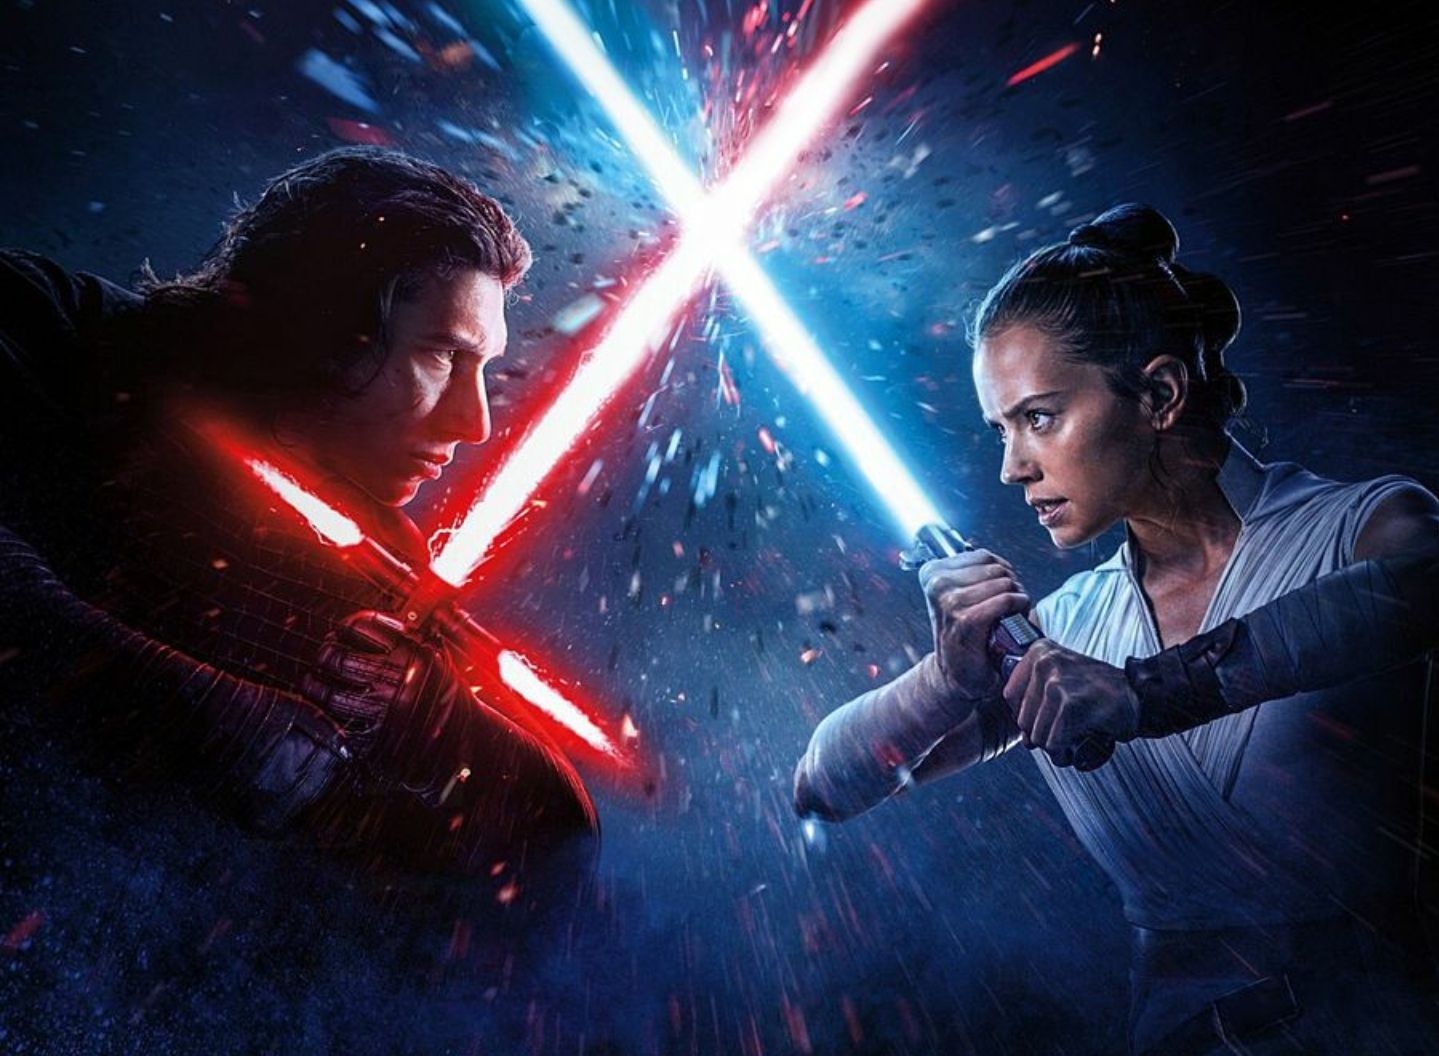 The best part about the Sequel Trilogy. The dynamic relationship between Rey & Ben. Rey star wars, Star wars poster, Star wars